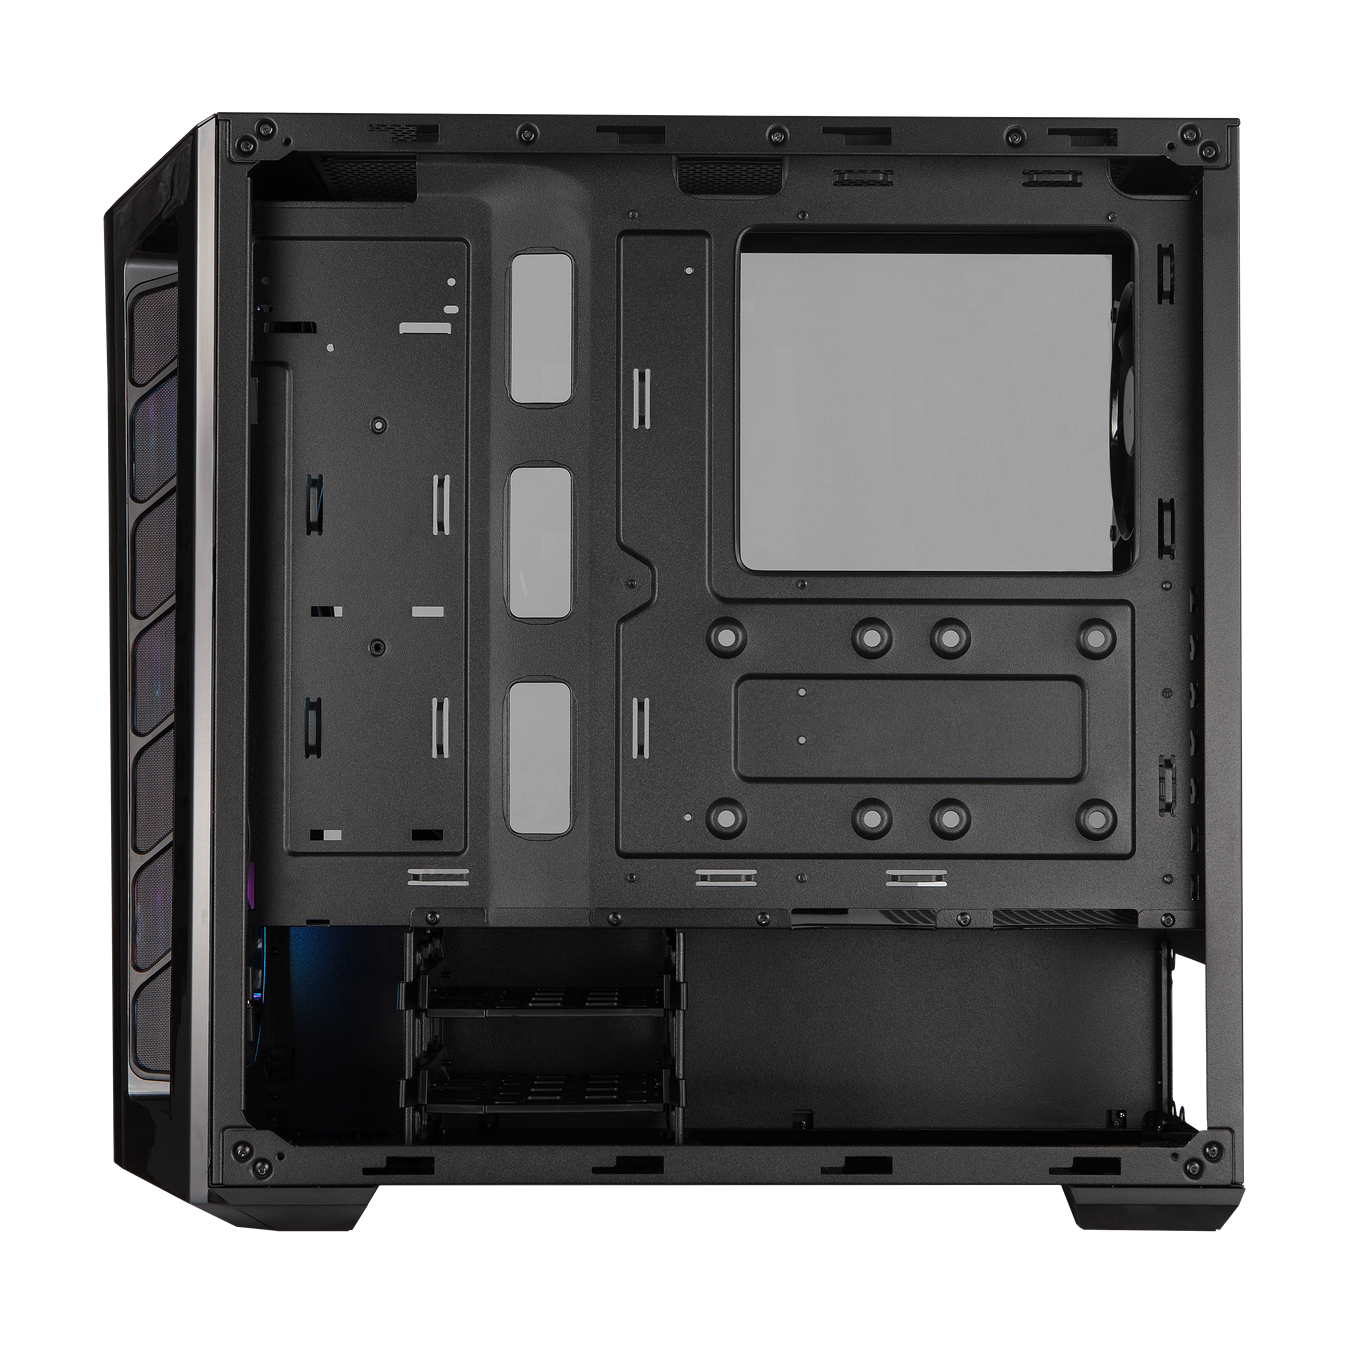 Cooler Master MasterBox MB520 ARGB - ATX PC Case with Tinted Front Panel, 3  x 120mm Pre-Installed Fans, Glass Side Panel, Flexible Air Flow